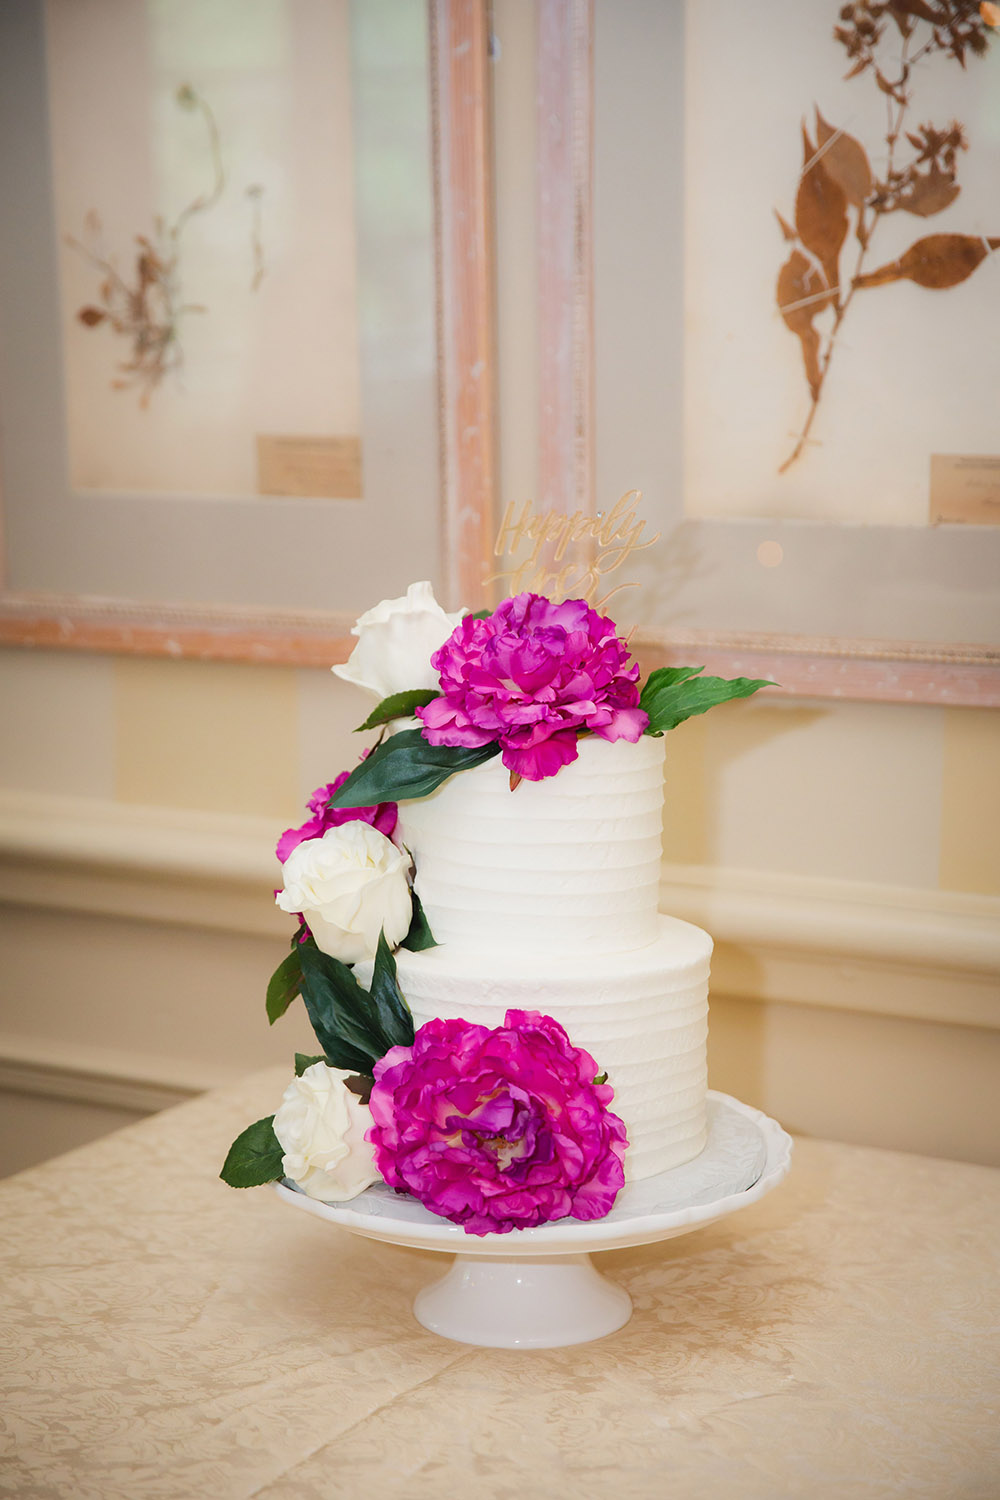 Kiara and Michael's wedding cake was embellished with beautiful fresh flowers in ivory and fuschia. Photo: Brian Jarreau Photography